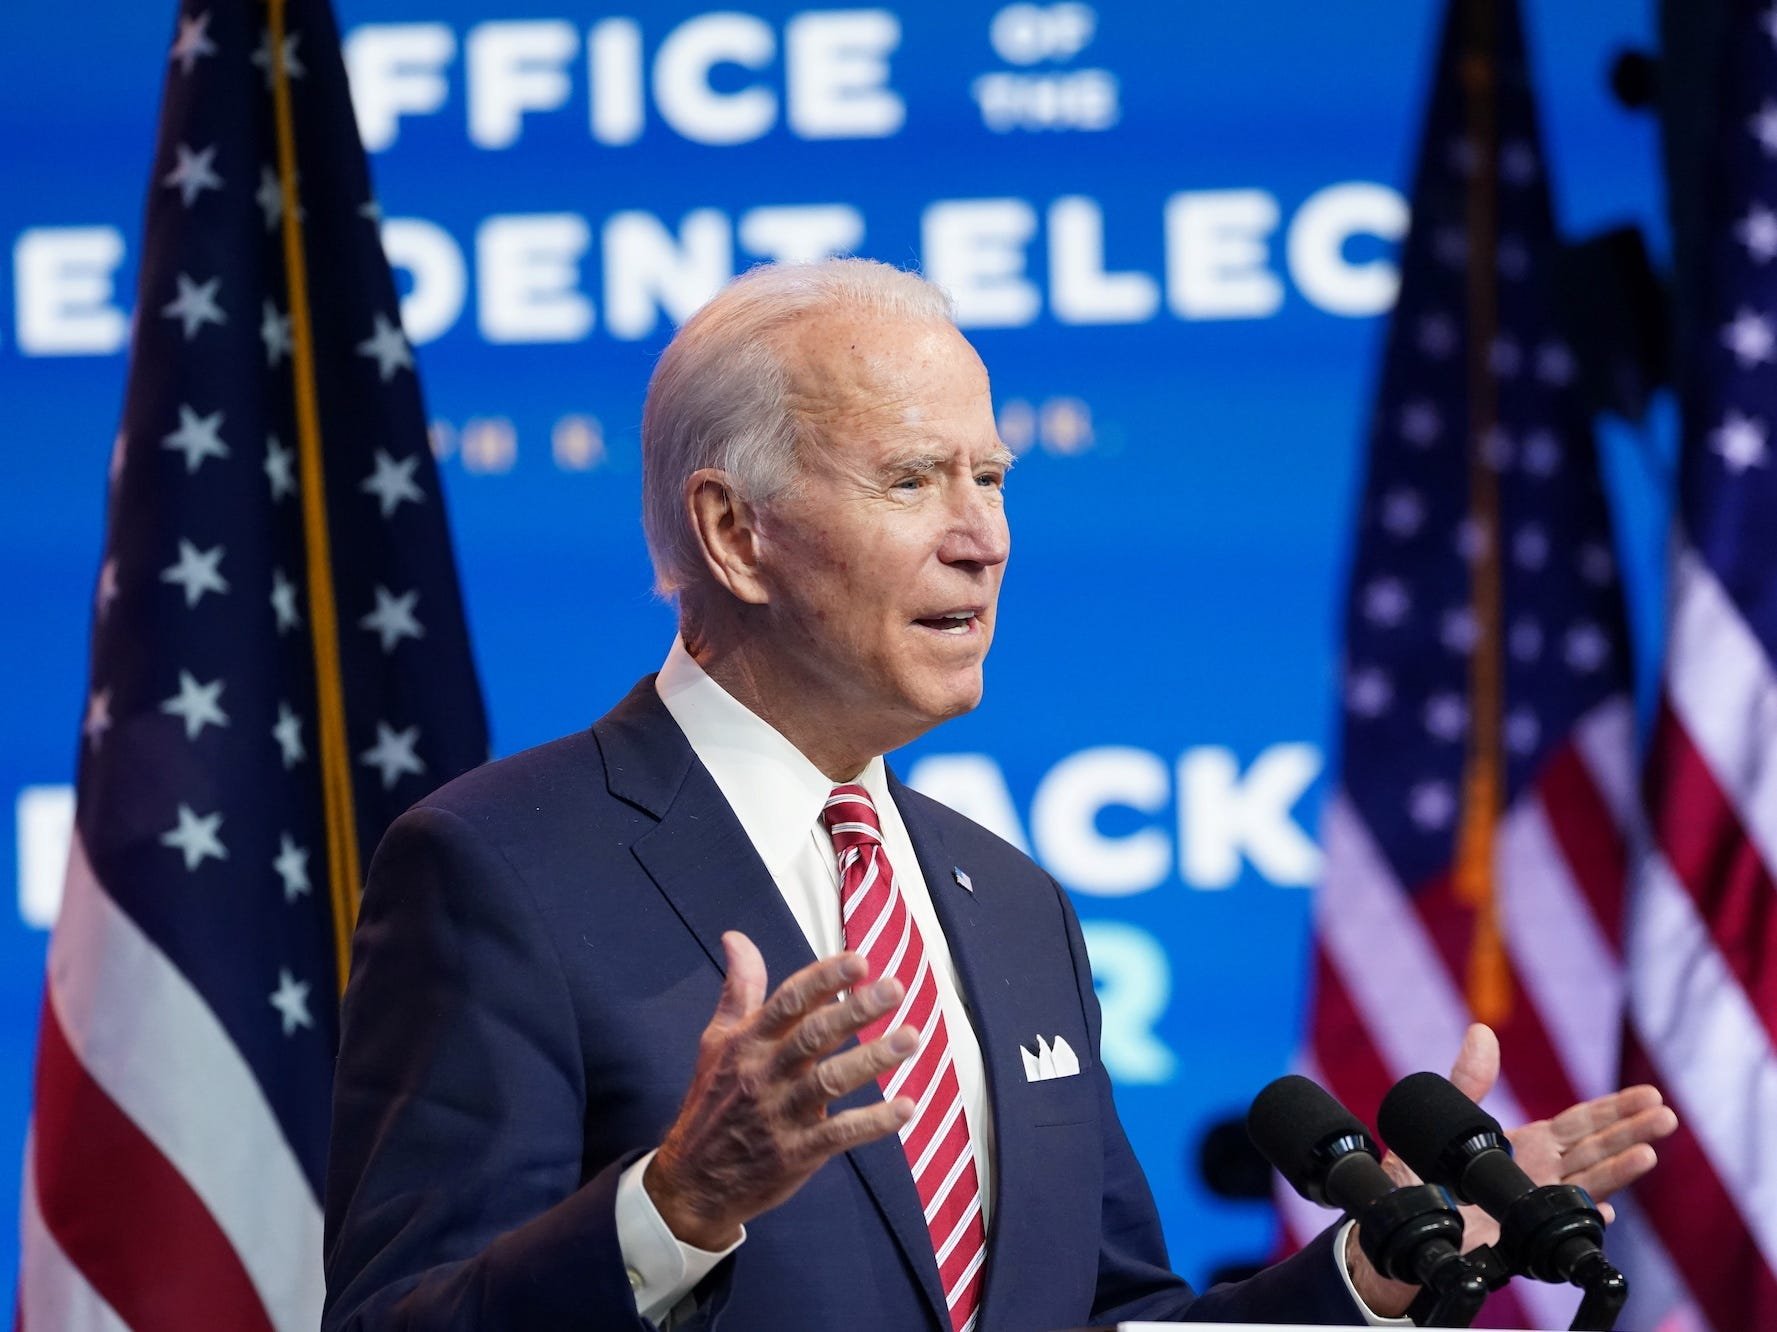 Biden's new stimulus plan features family benefits that include an annual credit of up to $3,600